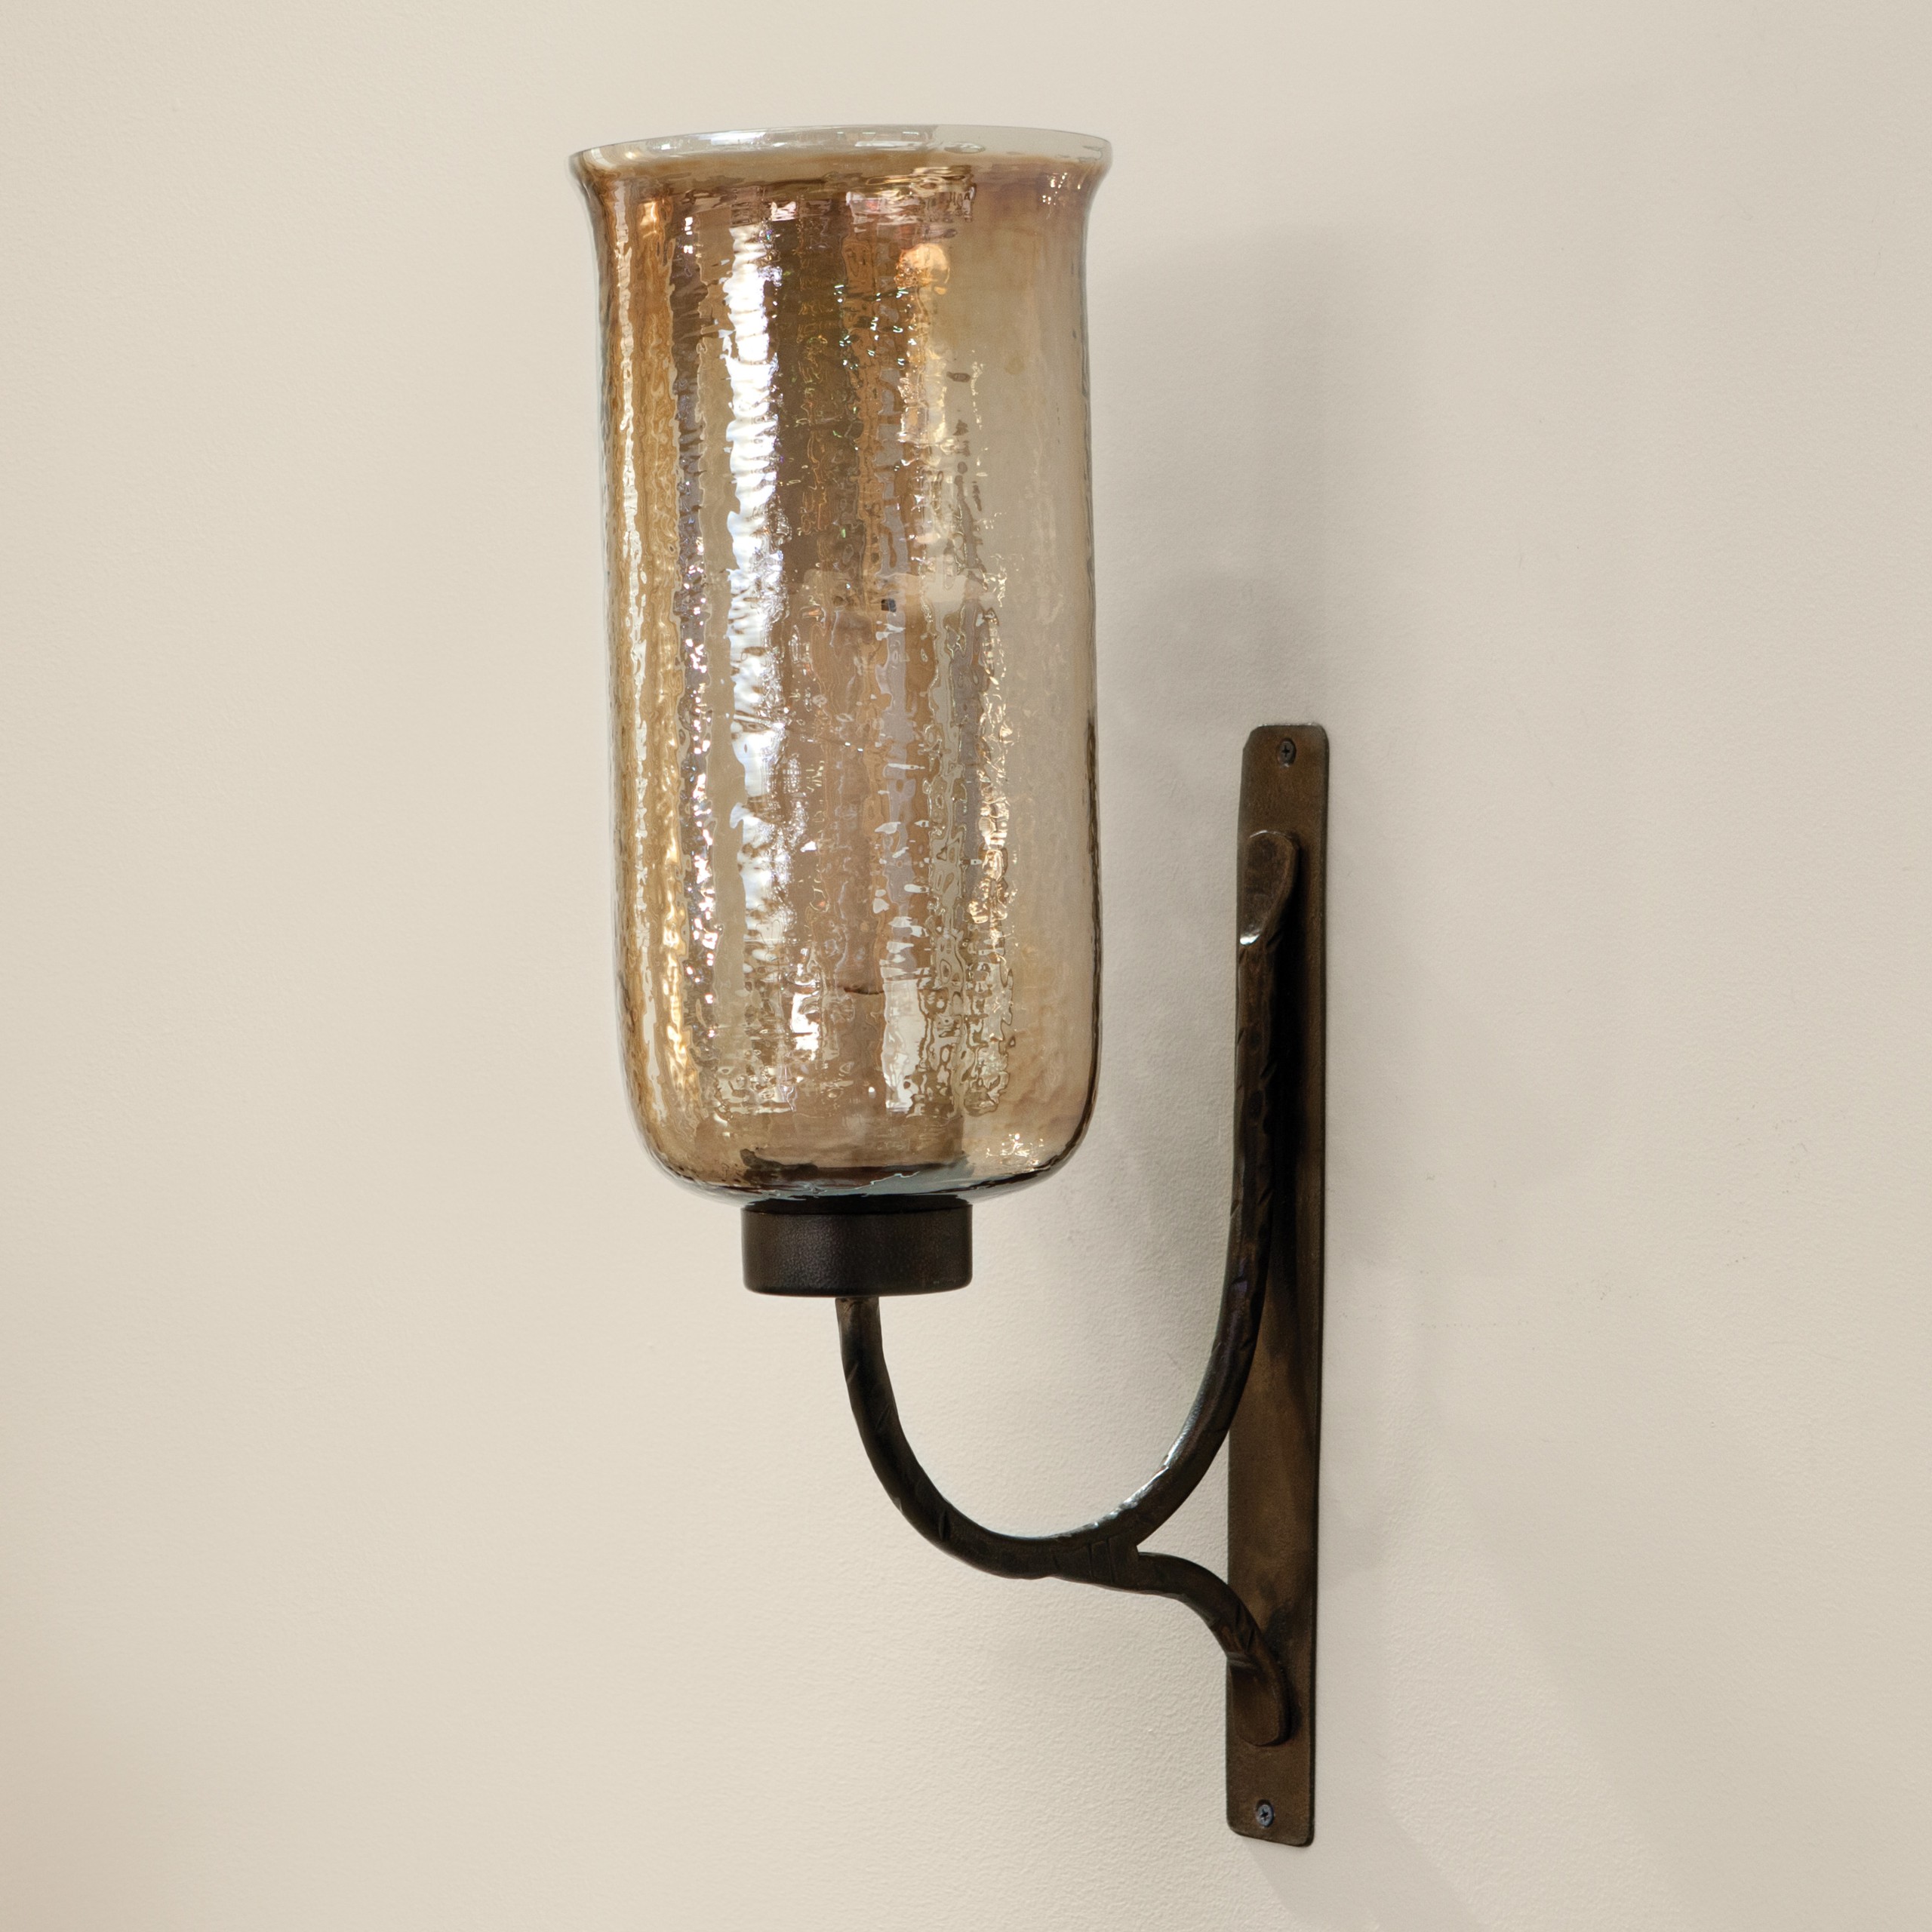 Imax large hurricane candle wall sconce at hayneedle